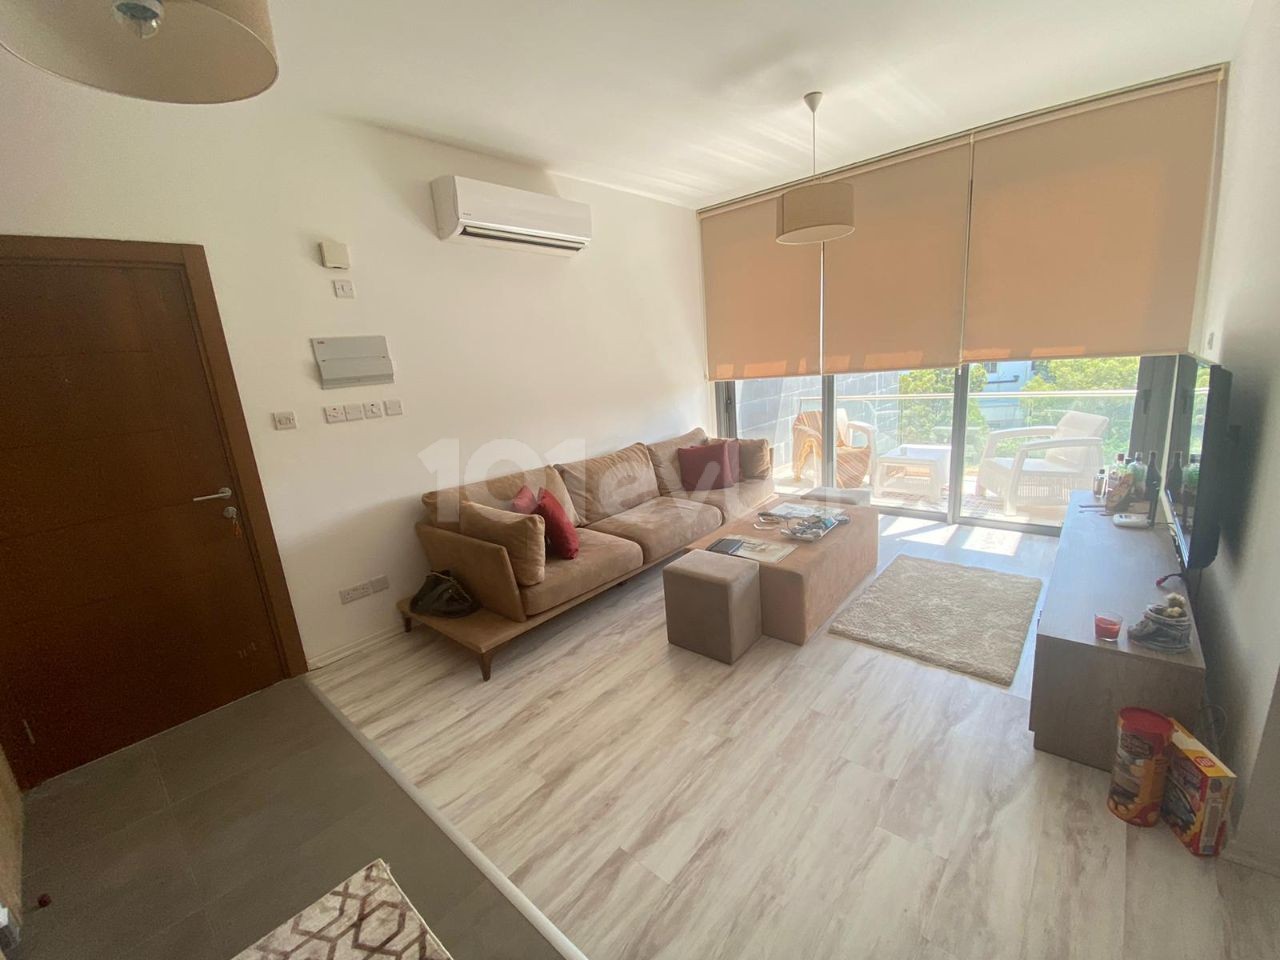 Dereboyunda 2+1 85m2 Modern Furnished and Centrally located Fully Furnished Apartment for Rent 400stg ** 